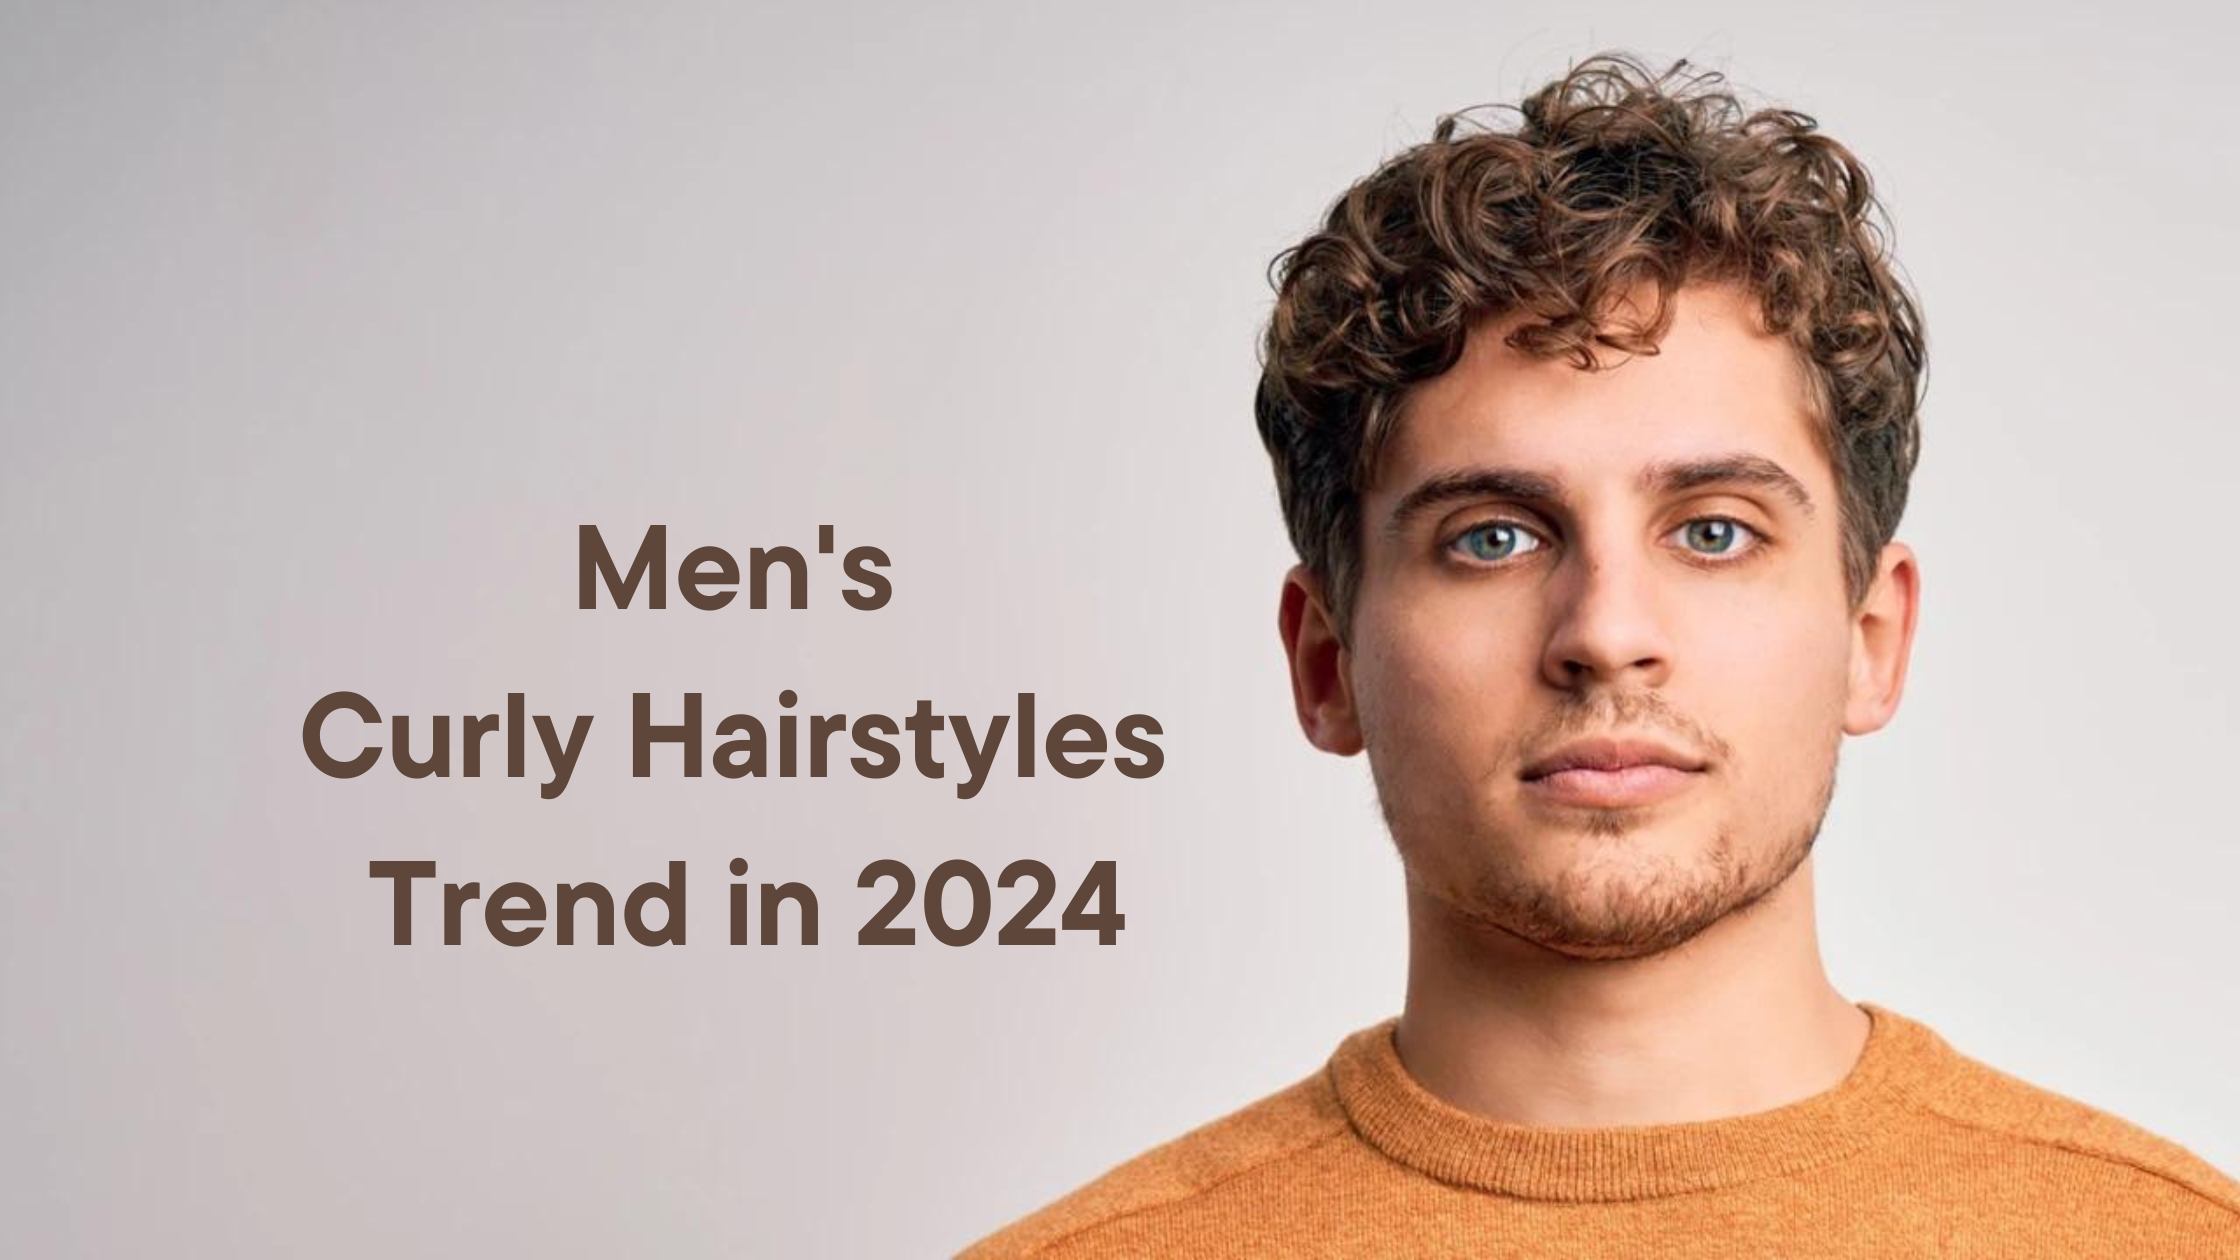 77 Best Curly Hair Hairstyles For Men: Short To Long Haircuts | Barba e  cabelo, Cabelo masculino, Cabelo